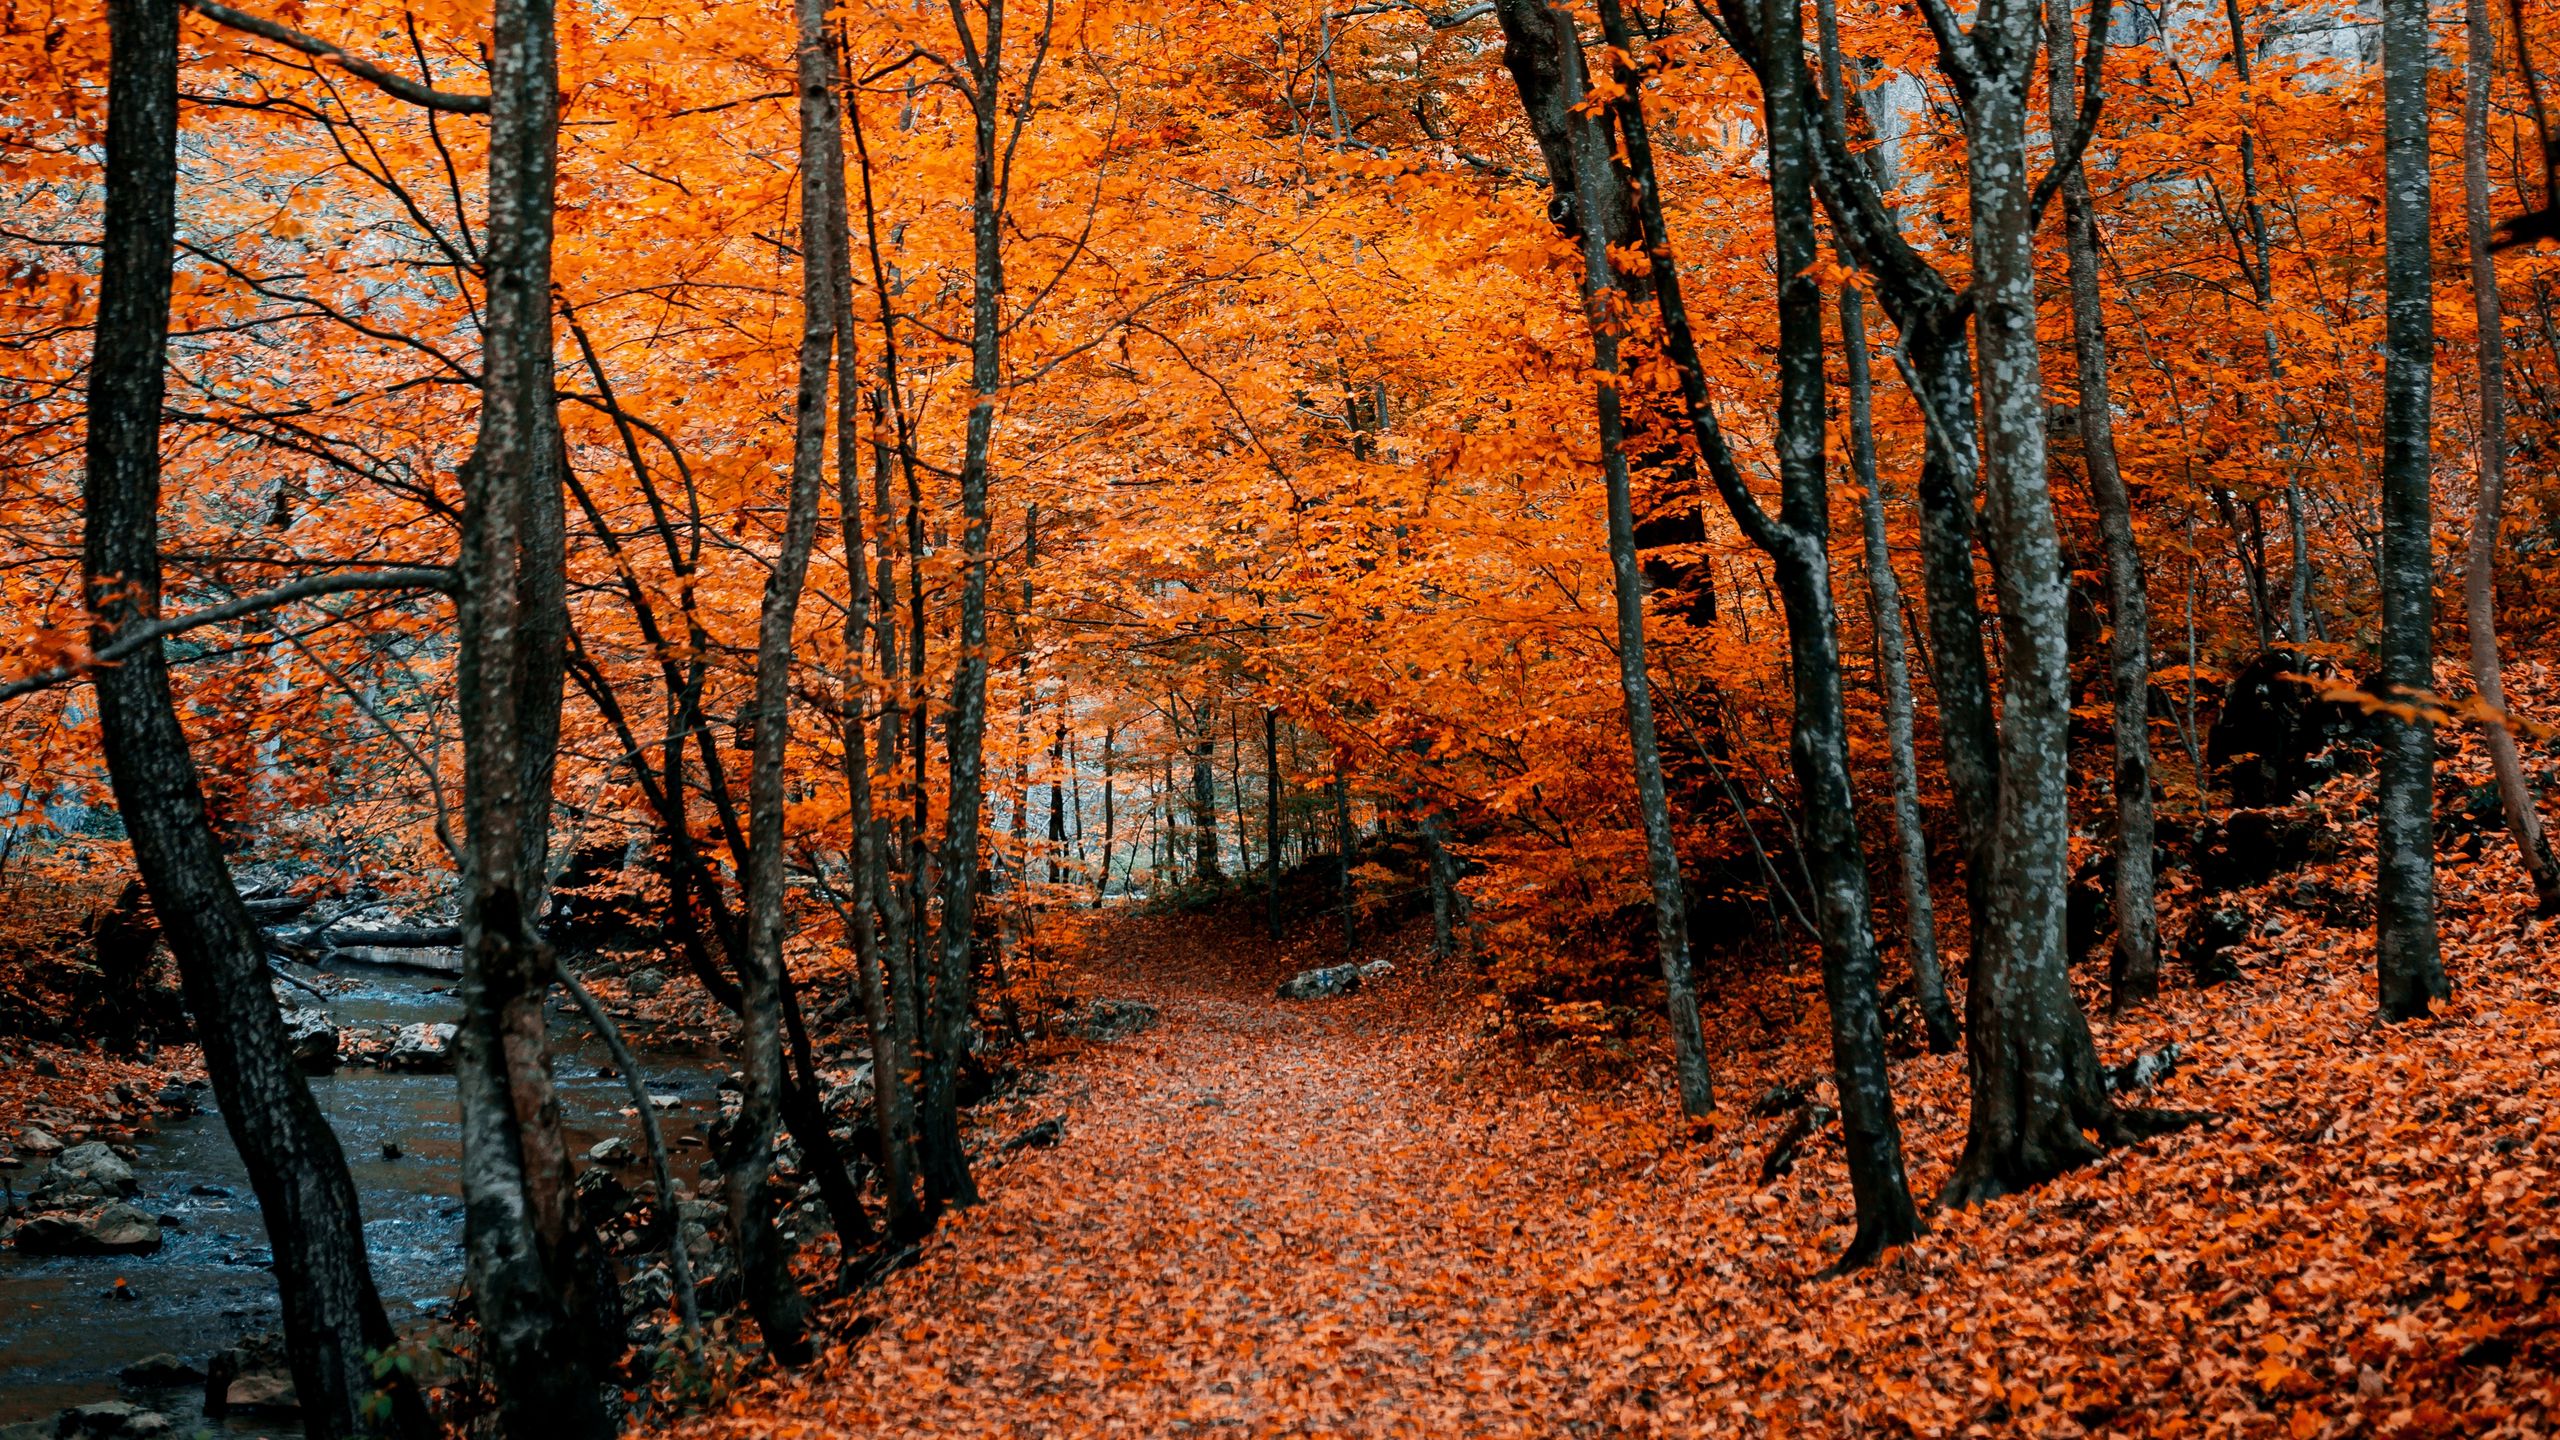 Download Wallpaper 2560x1440 Autumn Path Foliage Forest Trees